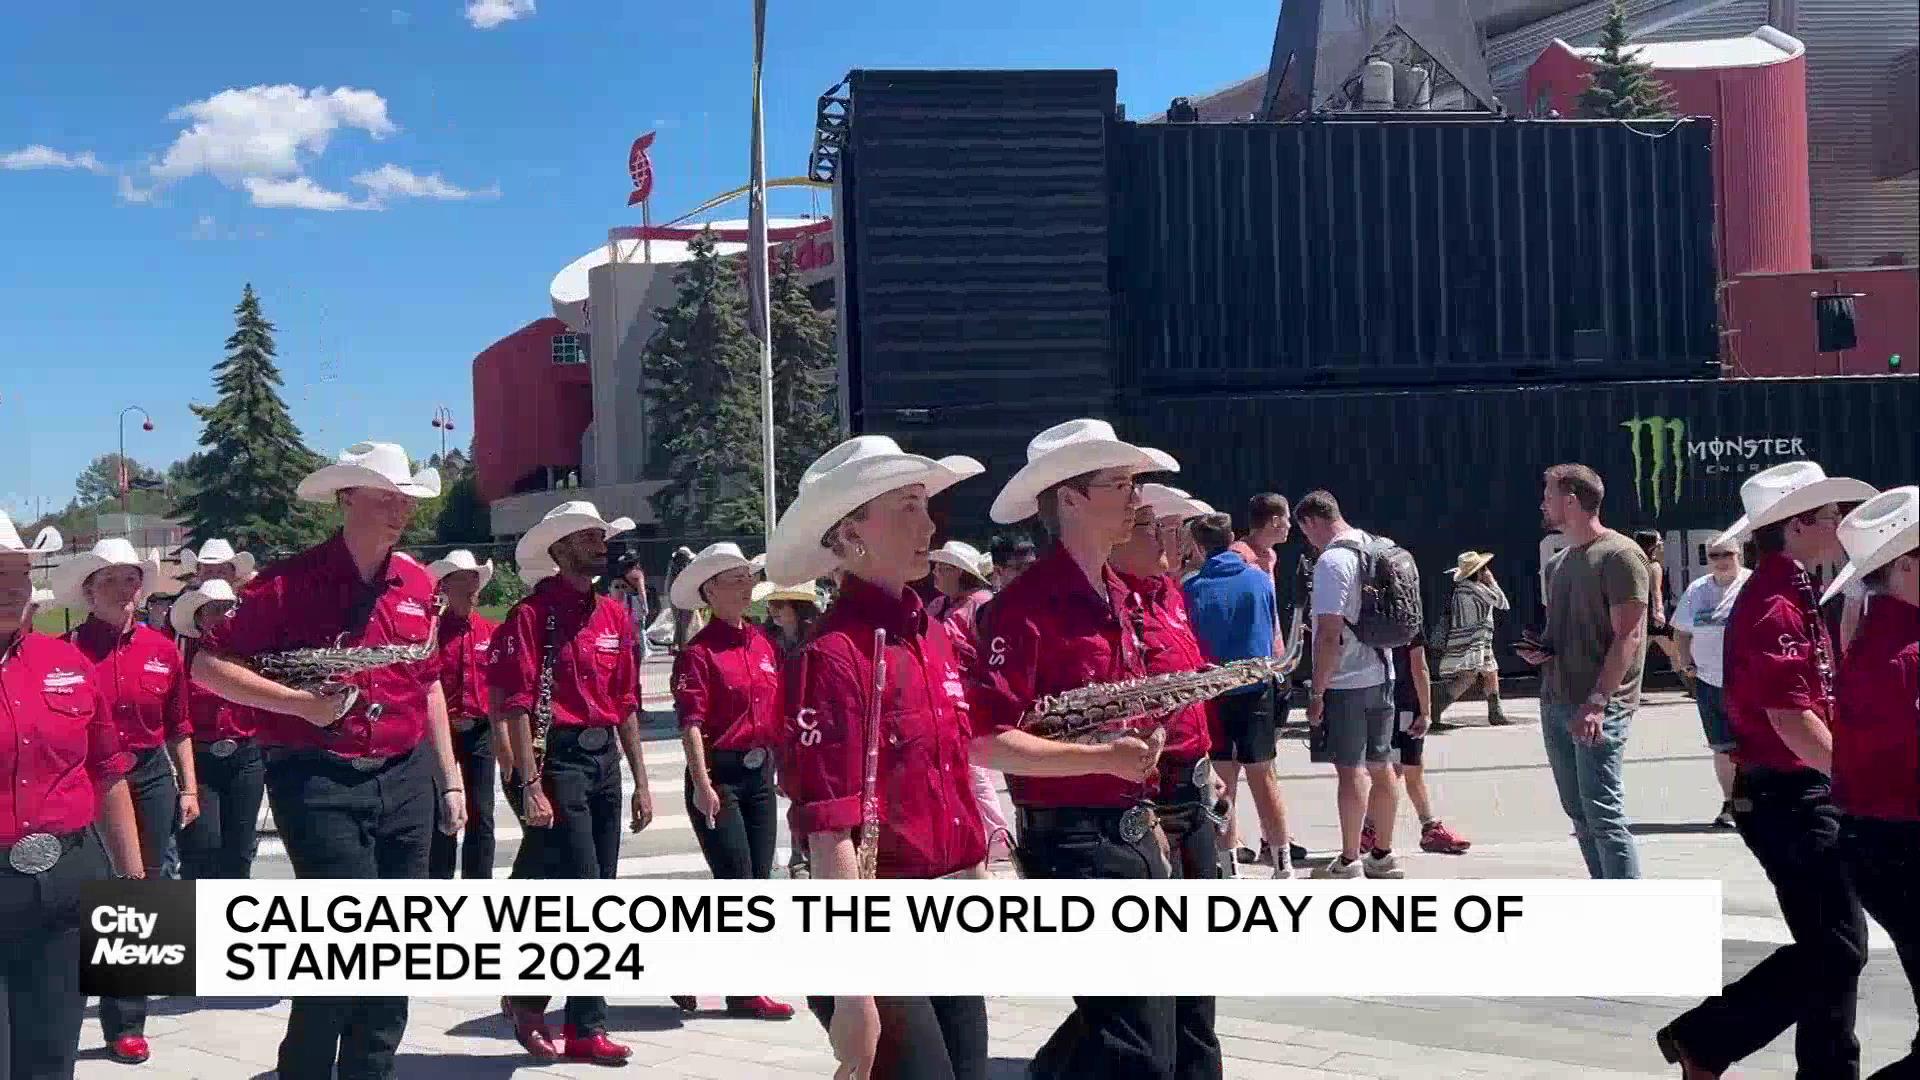 Calgary welcomes the world on first day of Stampede 2024